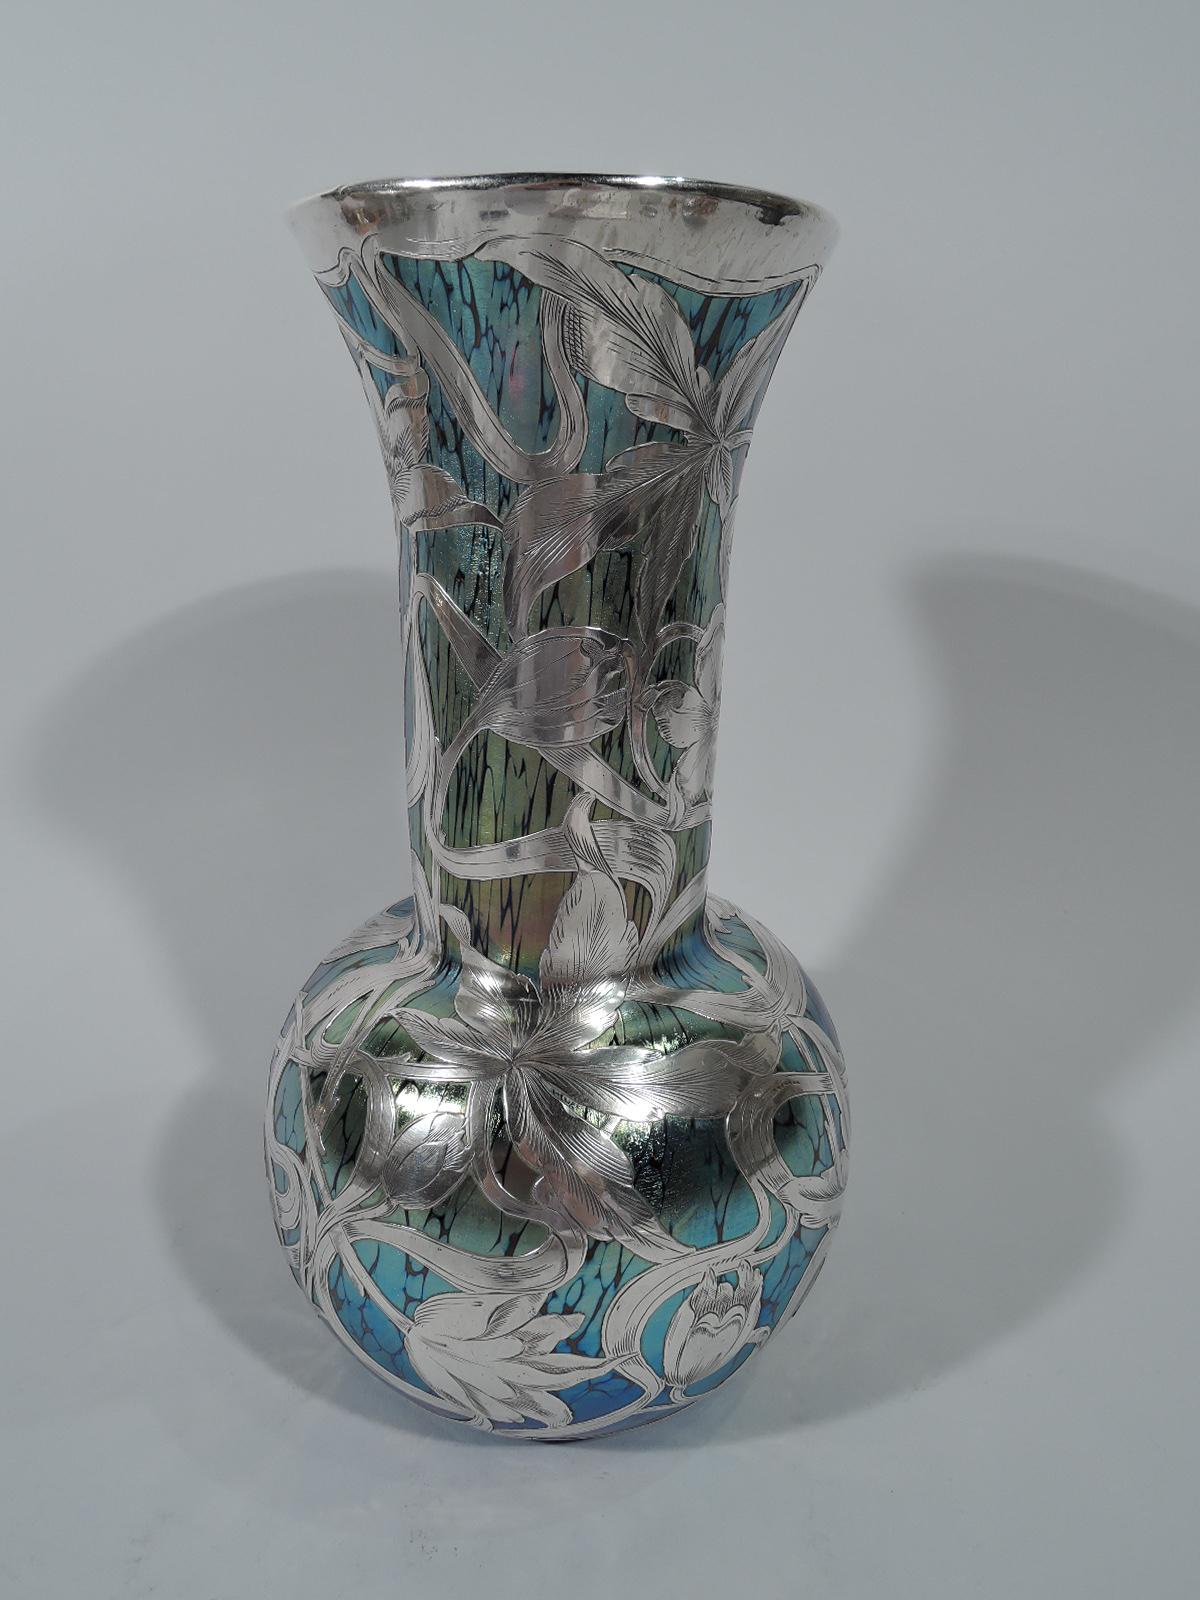 Art Nouveau glass vase with engraved silver overlay by historic Czech maker Loetz. Globular with cylindrical neck and flared rim. Glass is veined iridescent blue. Fluid and dynamic overlay in form of naturalistic blooms with interlacing stems.